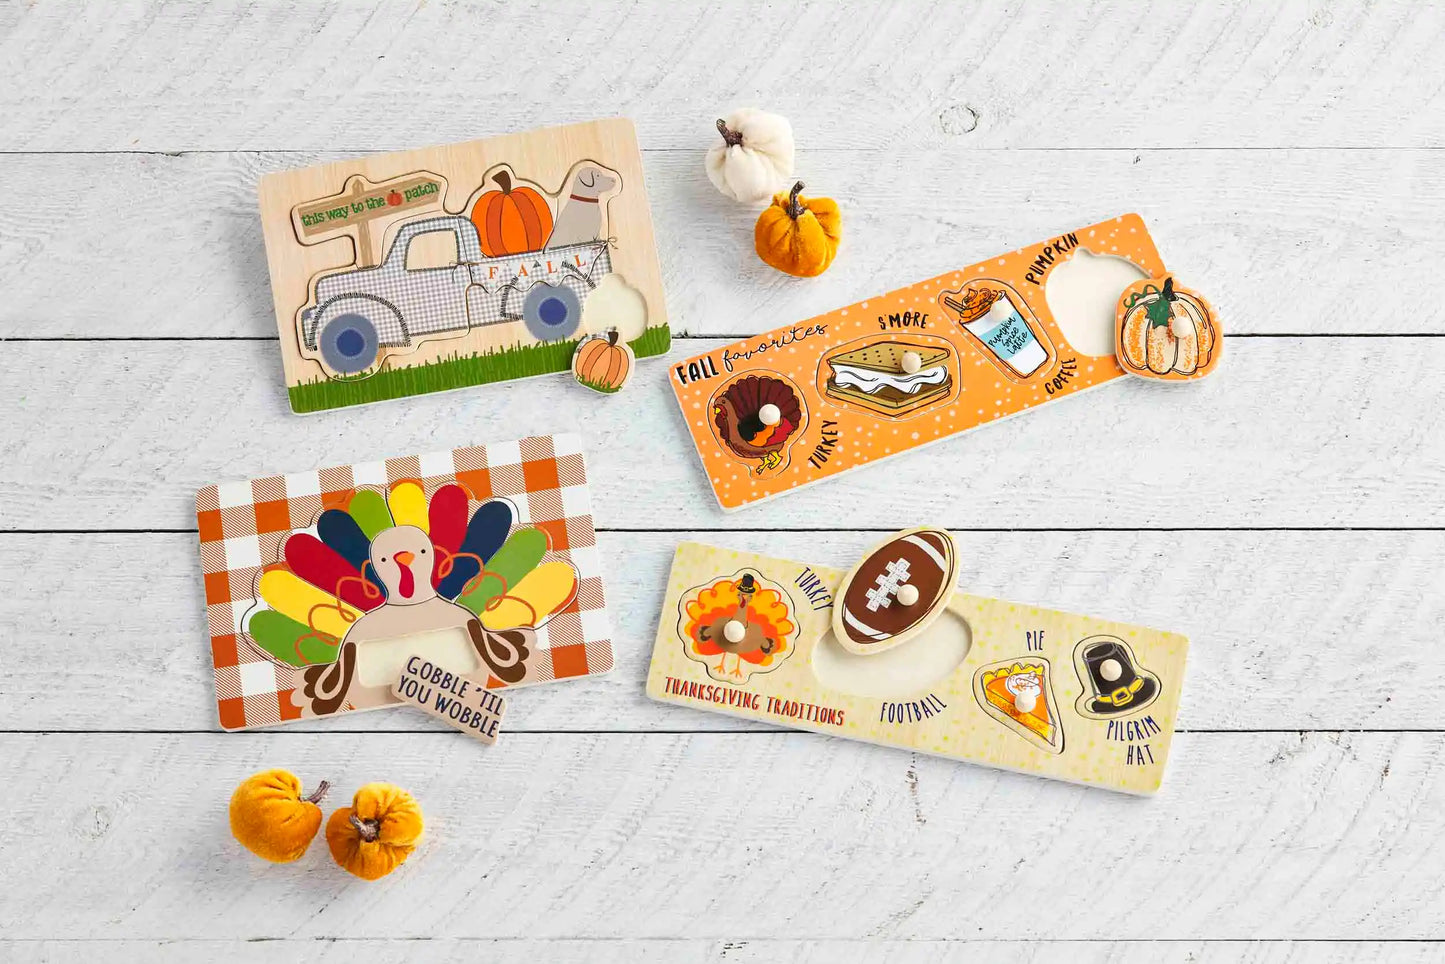 Thanksgiving Traditions Puzzle  - Doodlebug's Children's Boutique